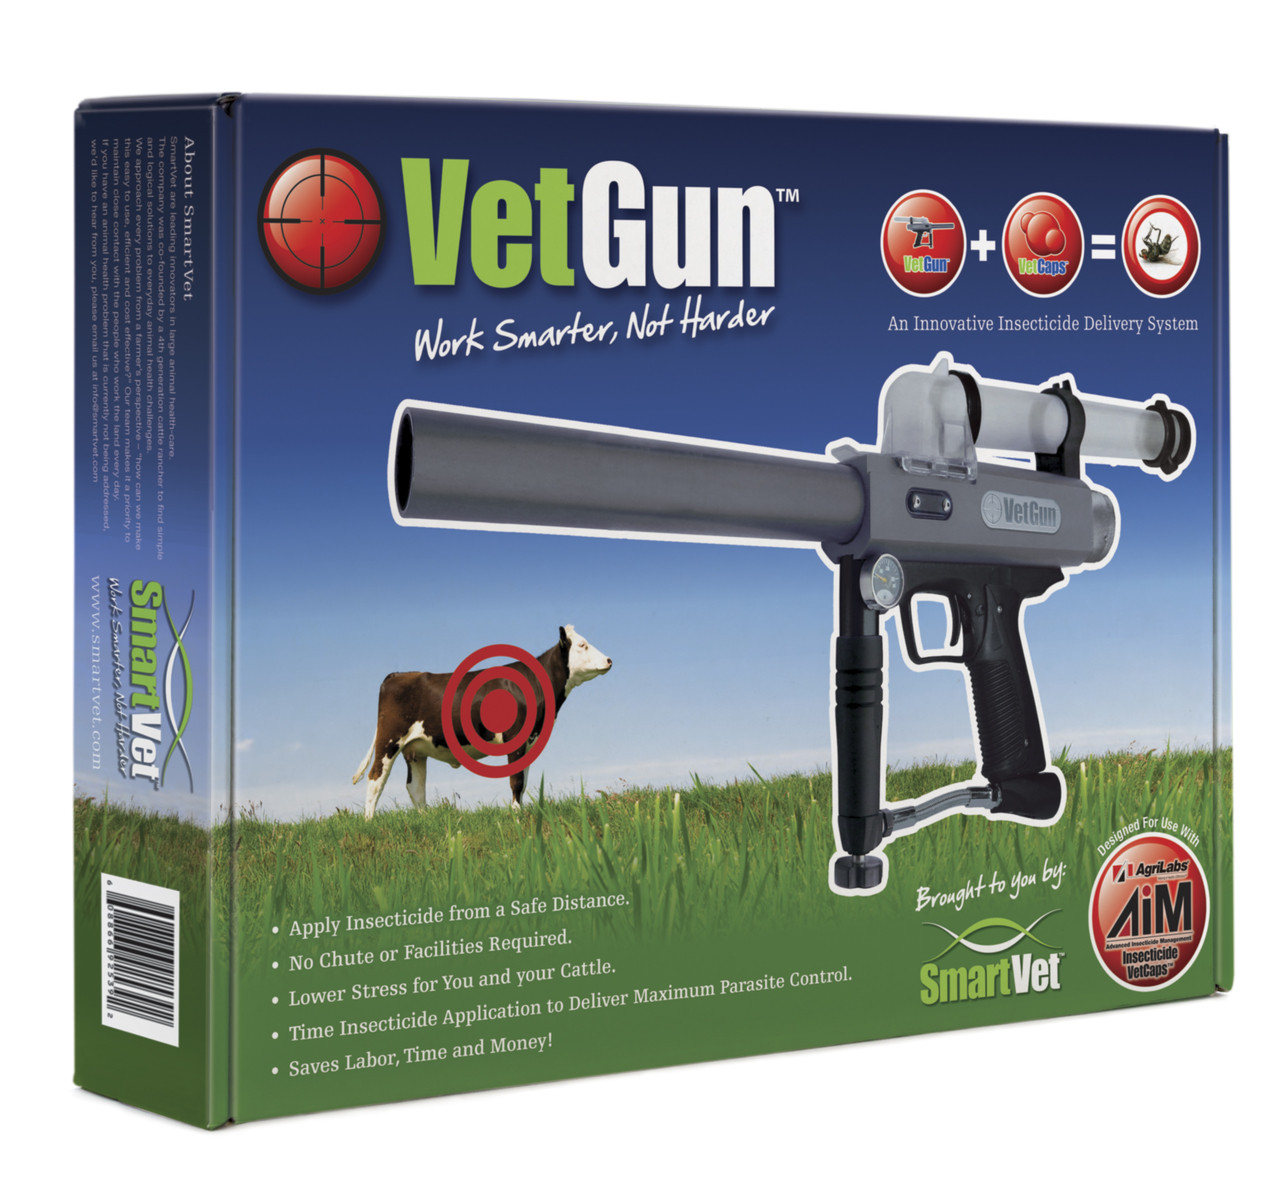 VetGun Insecticide Delivery System